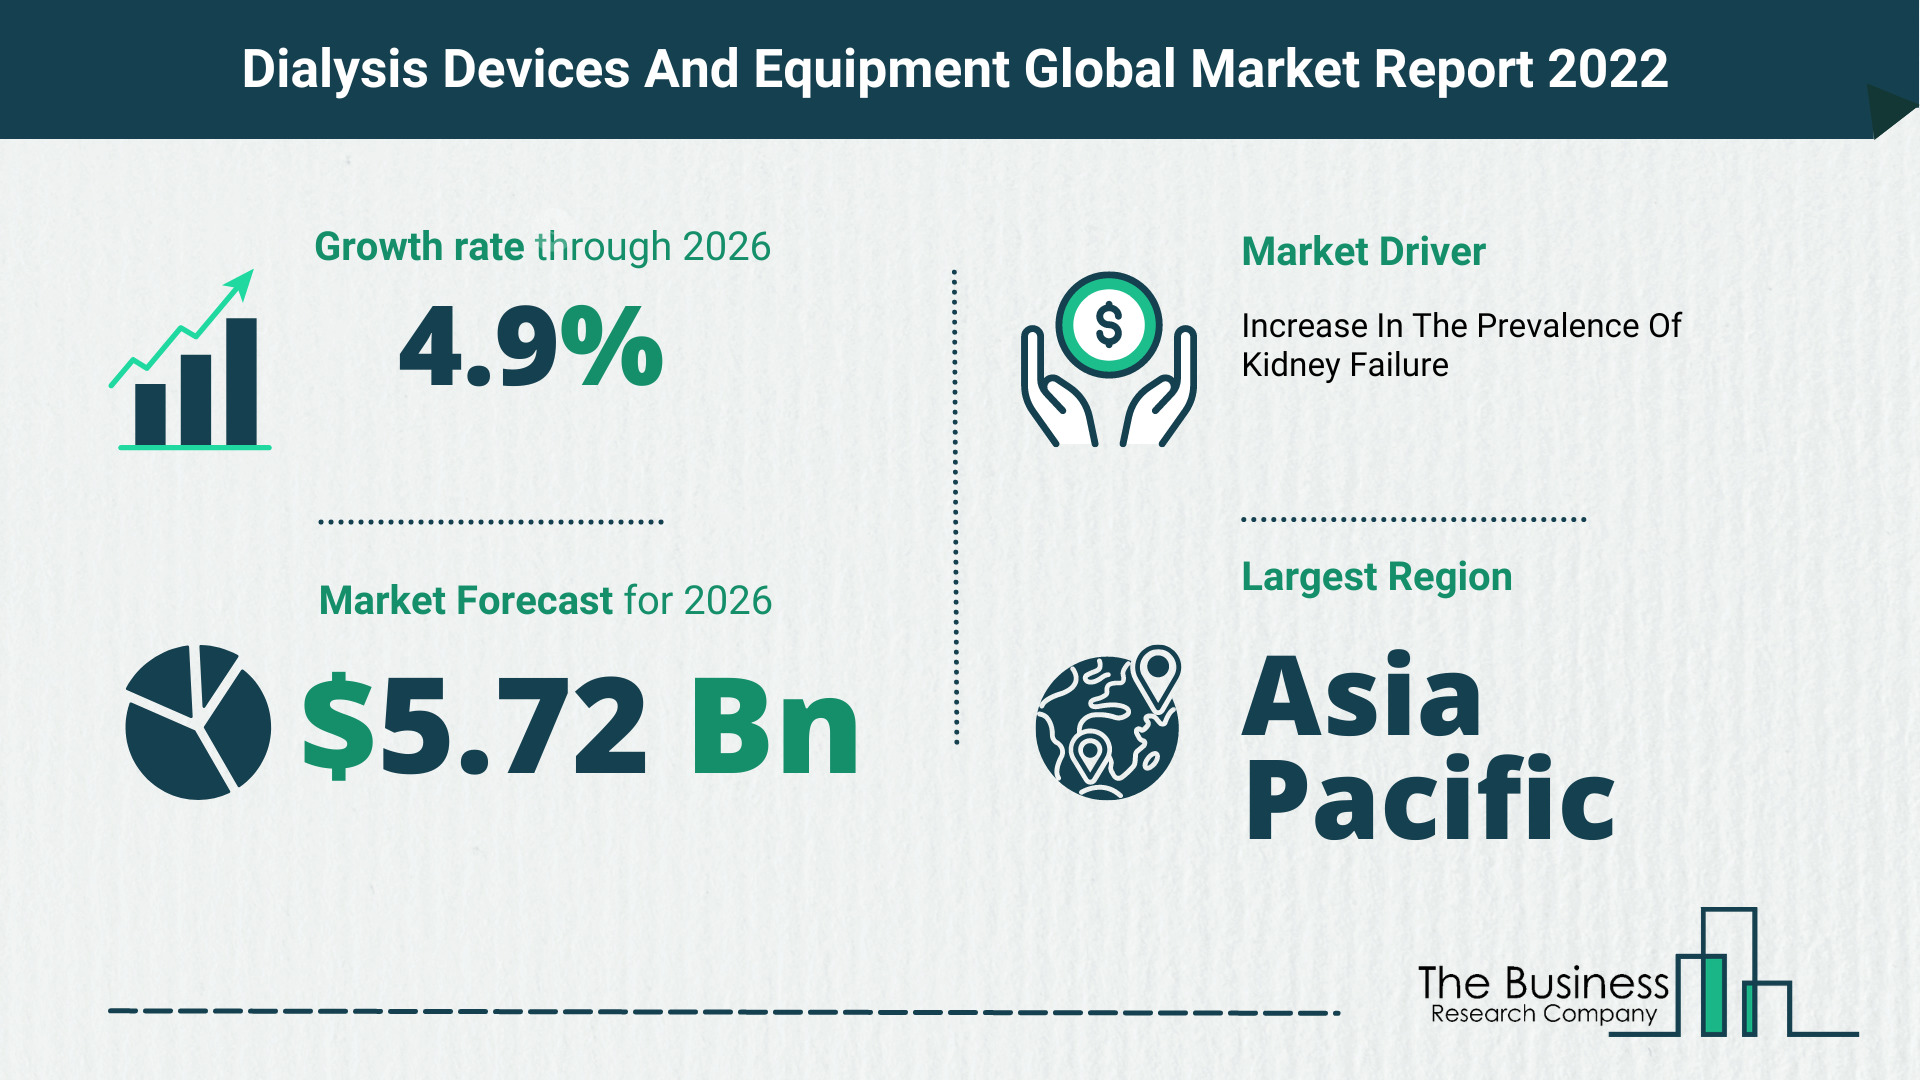 Latest Dialysis Devices And Equipment Market Growth Study 2022-2026 By The Business Research Company